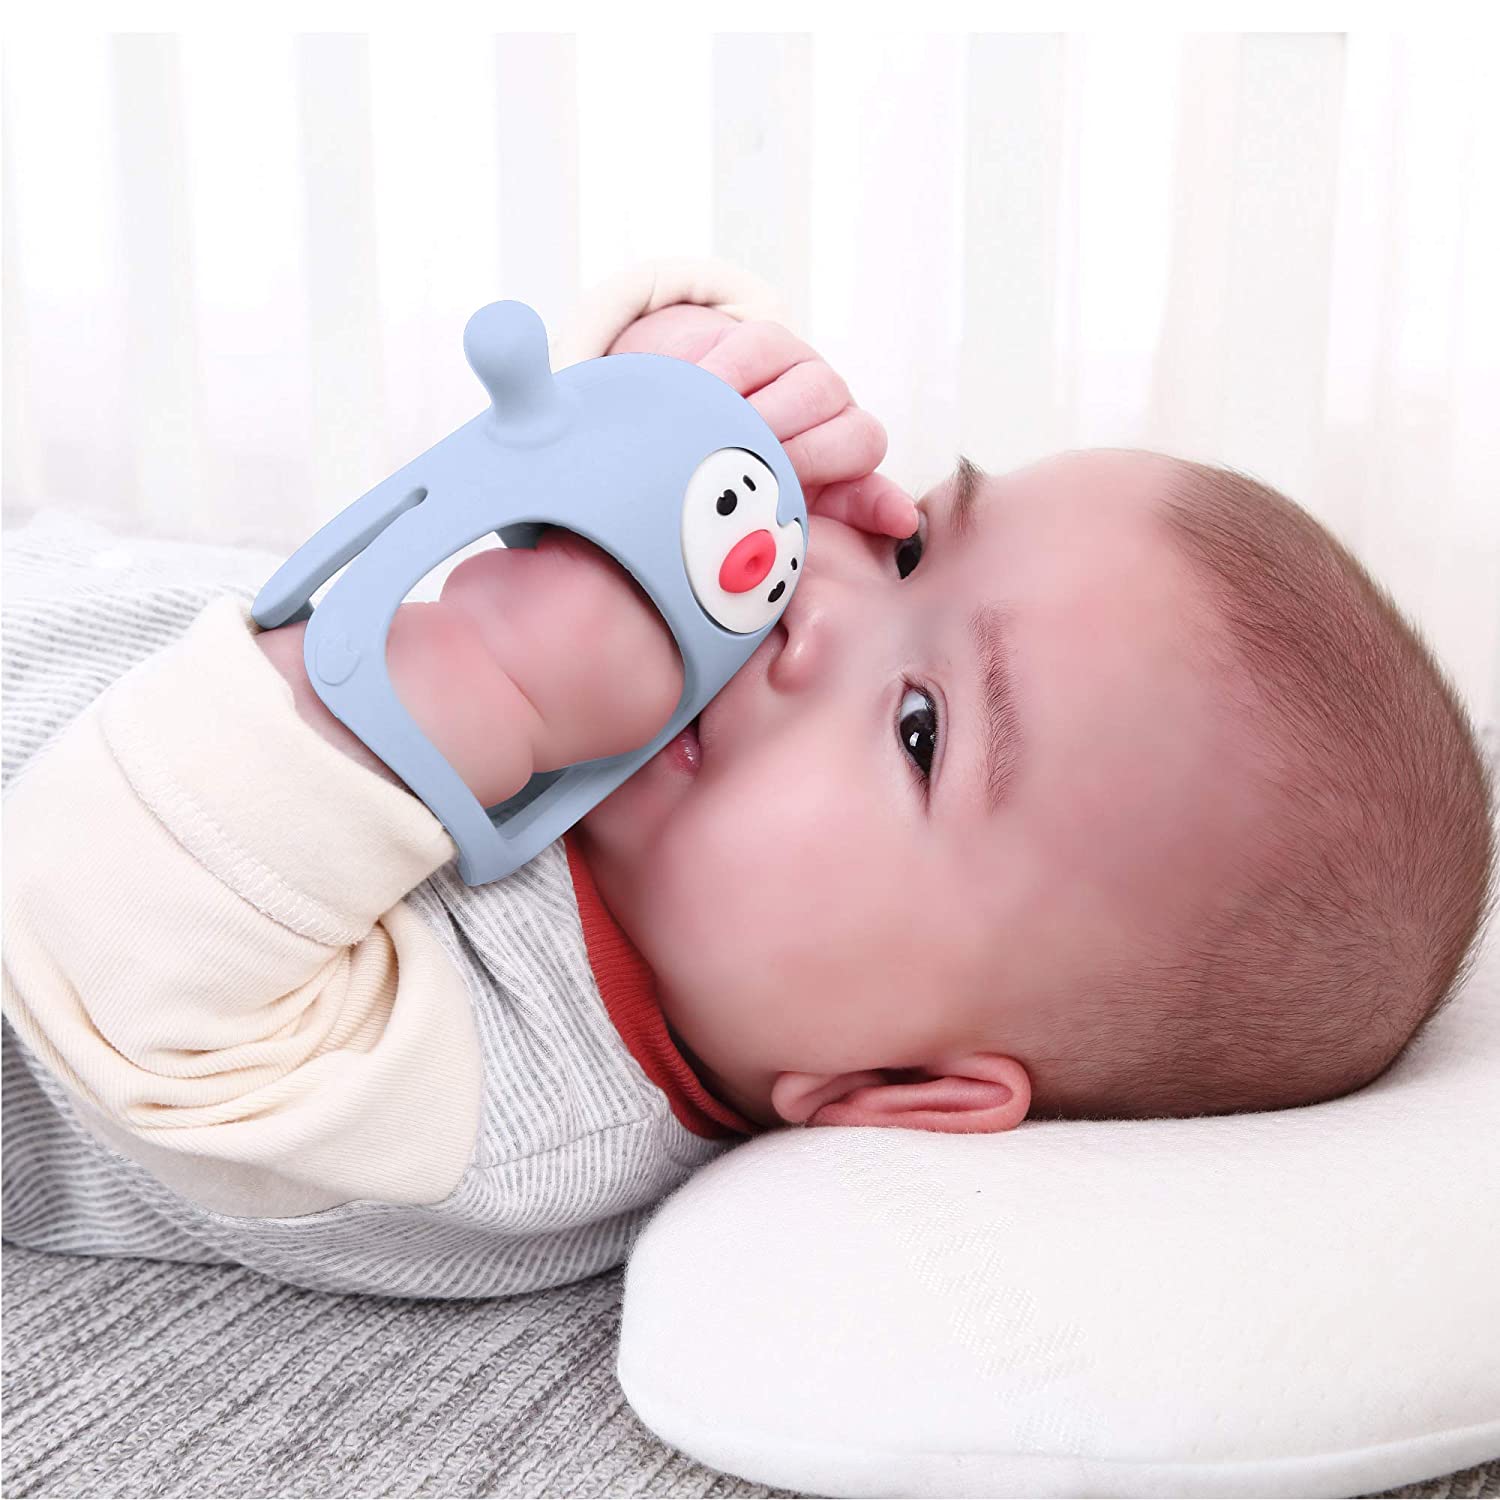 Smily Mia Penguin Buddy Never Drop Silicone Baby Teething Toy for 0-6month Infants, Baby Chew Toys for Sucking Needs, Hand Pacifier for Breast Feeding Babies, Car Seat Toy for New Born, Light Blue